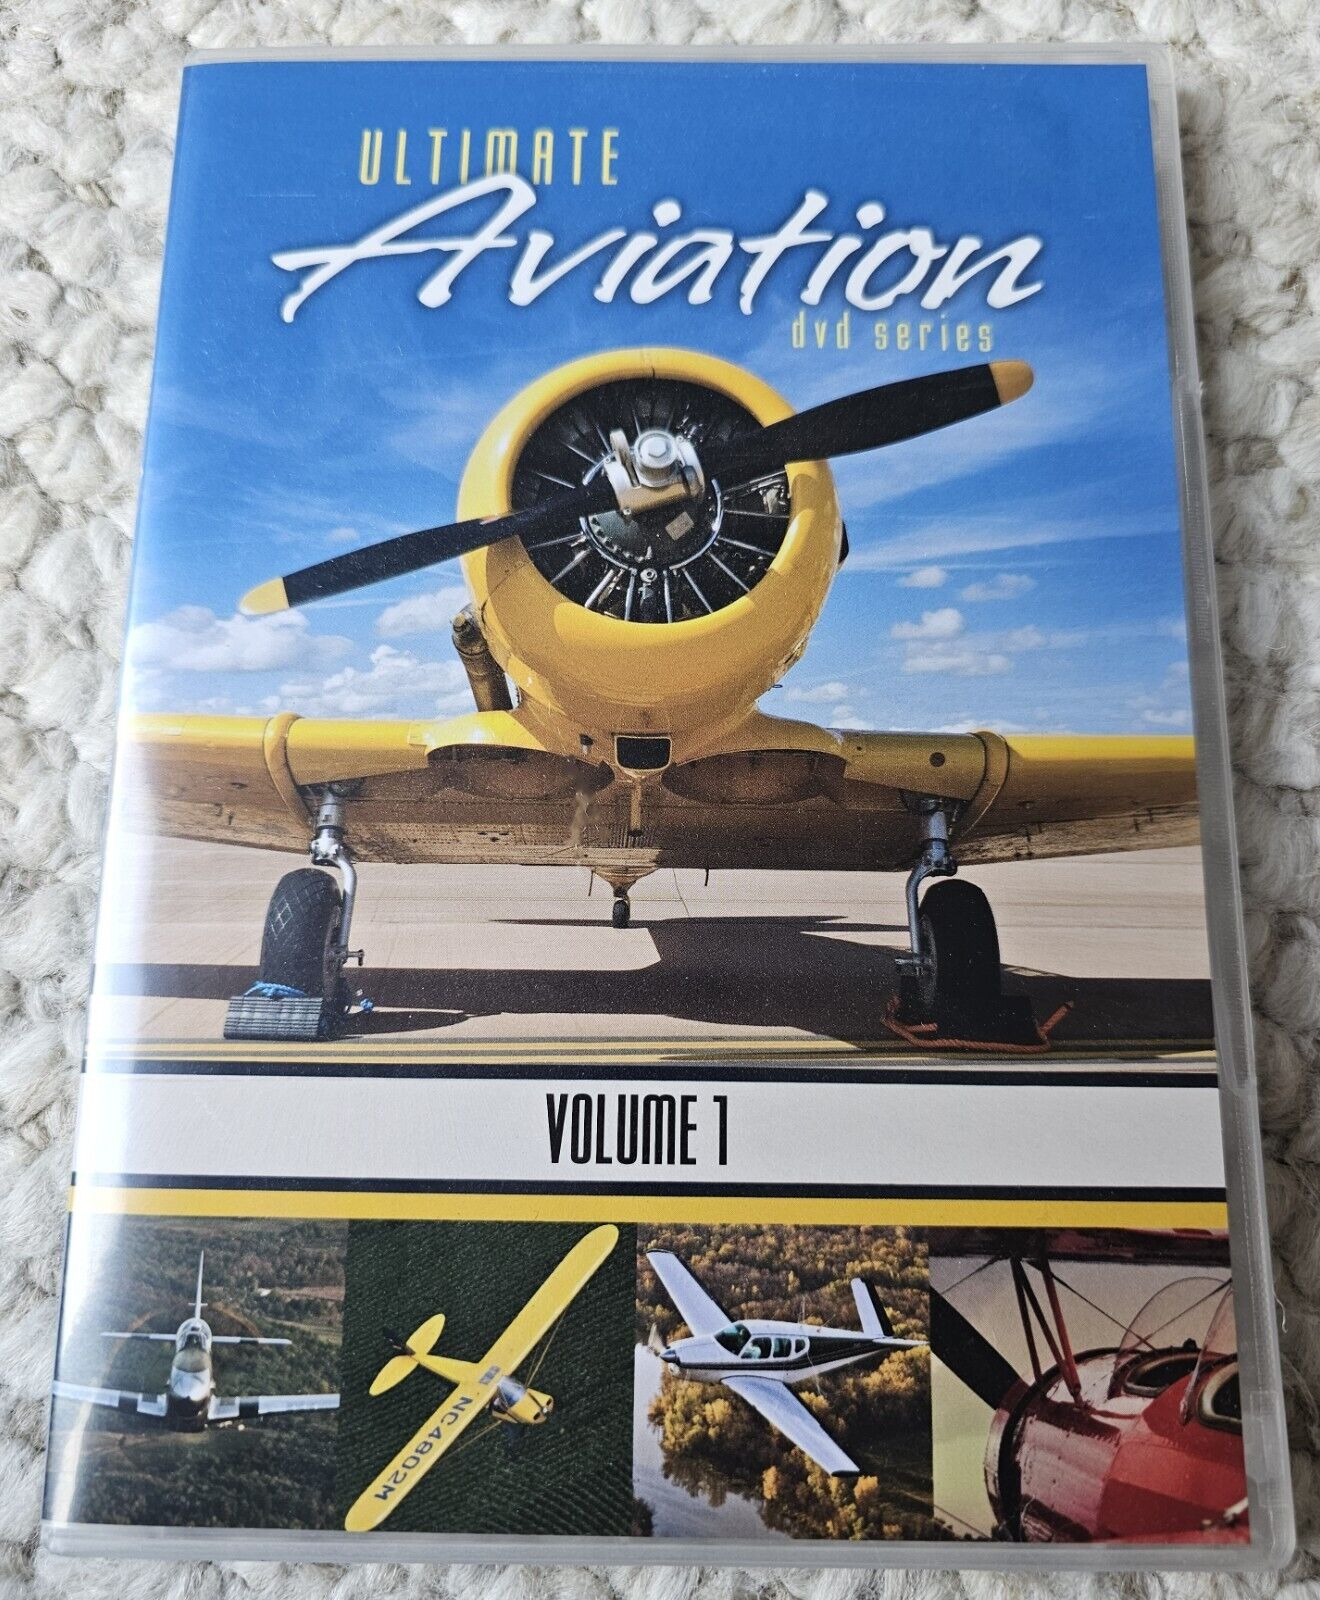 ULTIMATE AVIATION SERIES VOLUME 1 DVD VIDEO -NEW IN OPENED PKG